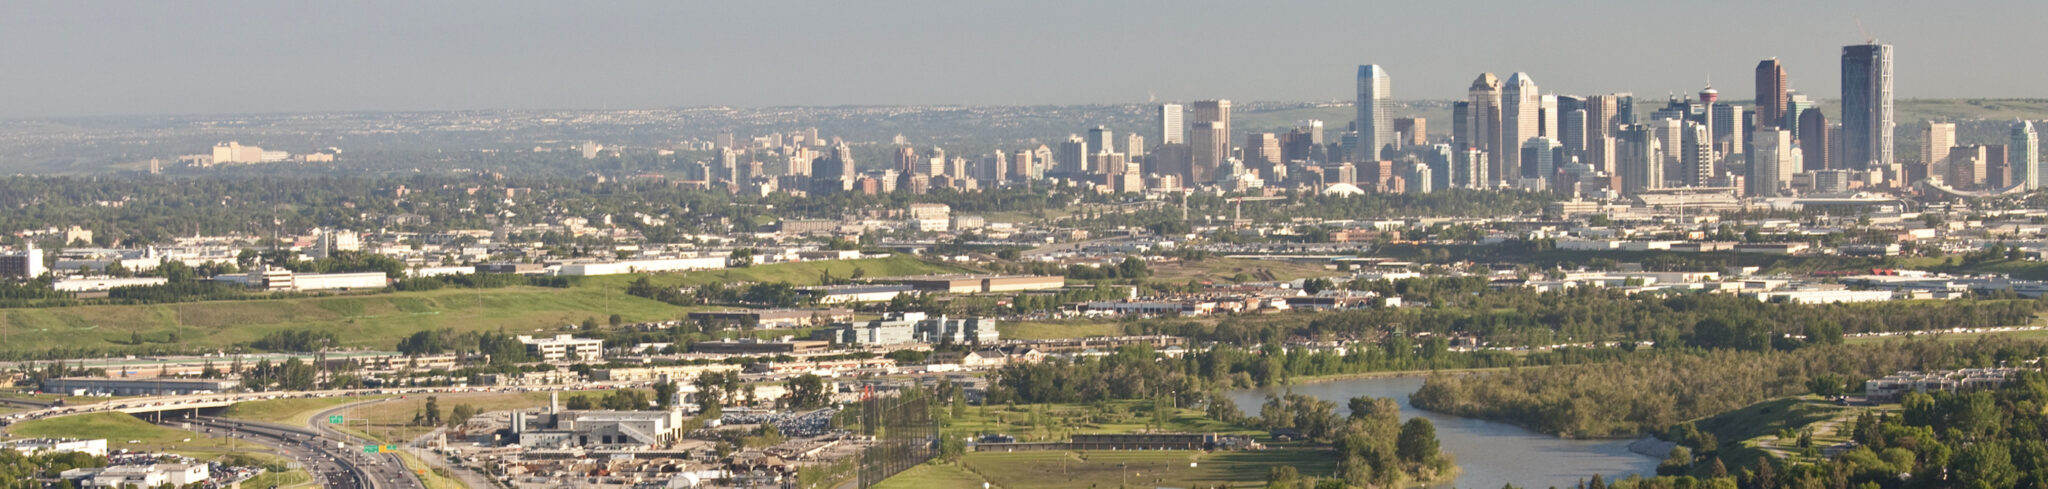 Calgary Foothills Industrial Park IT Services